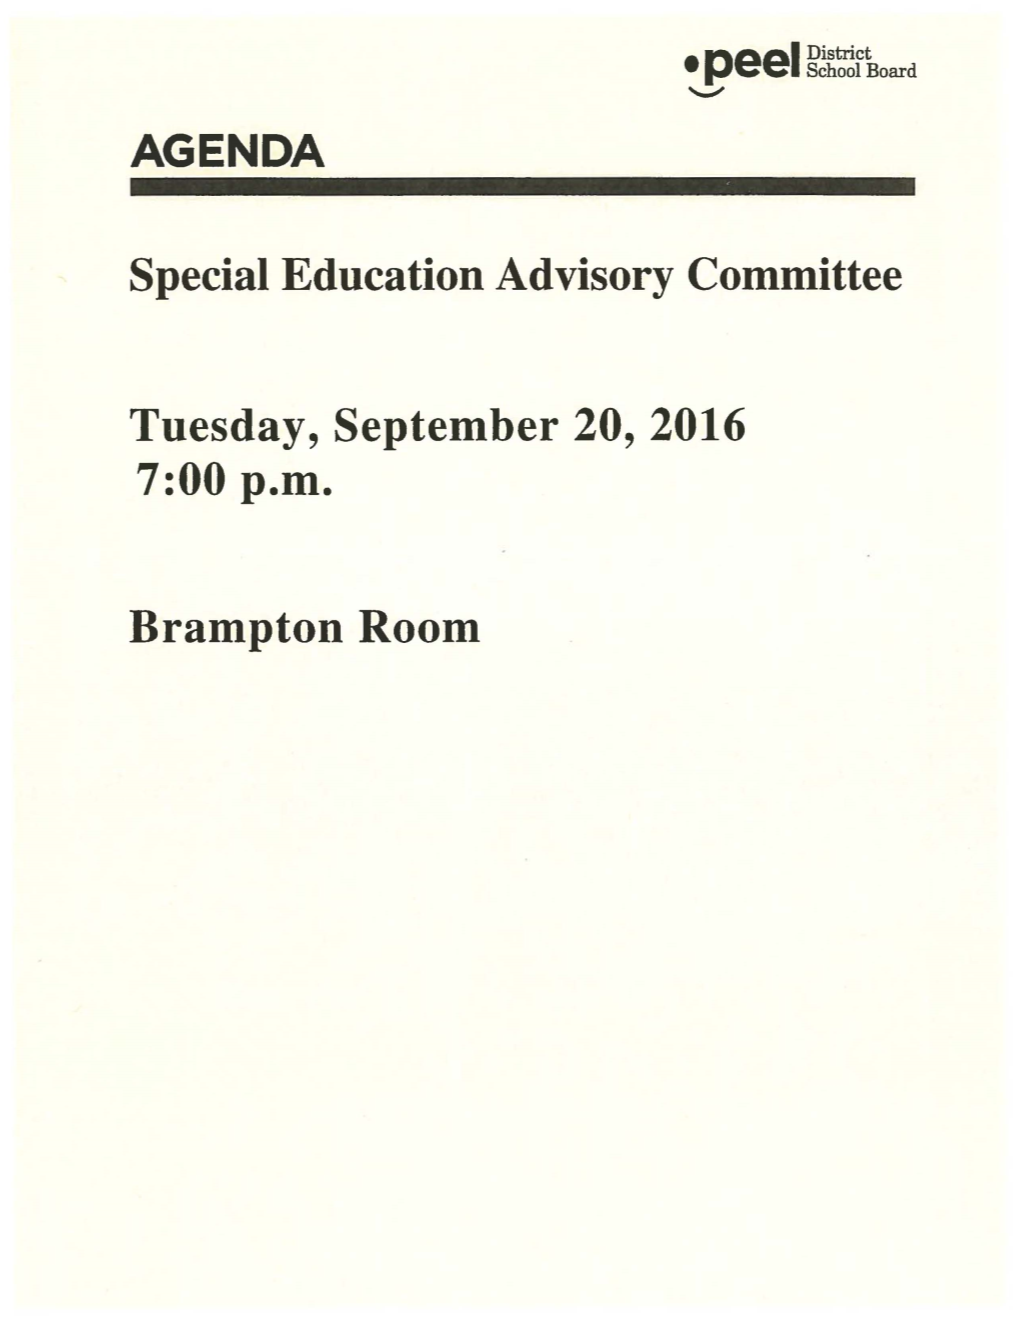 Special Education Advisory Committee Tuesday, September 20